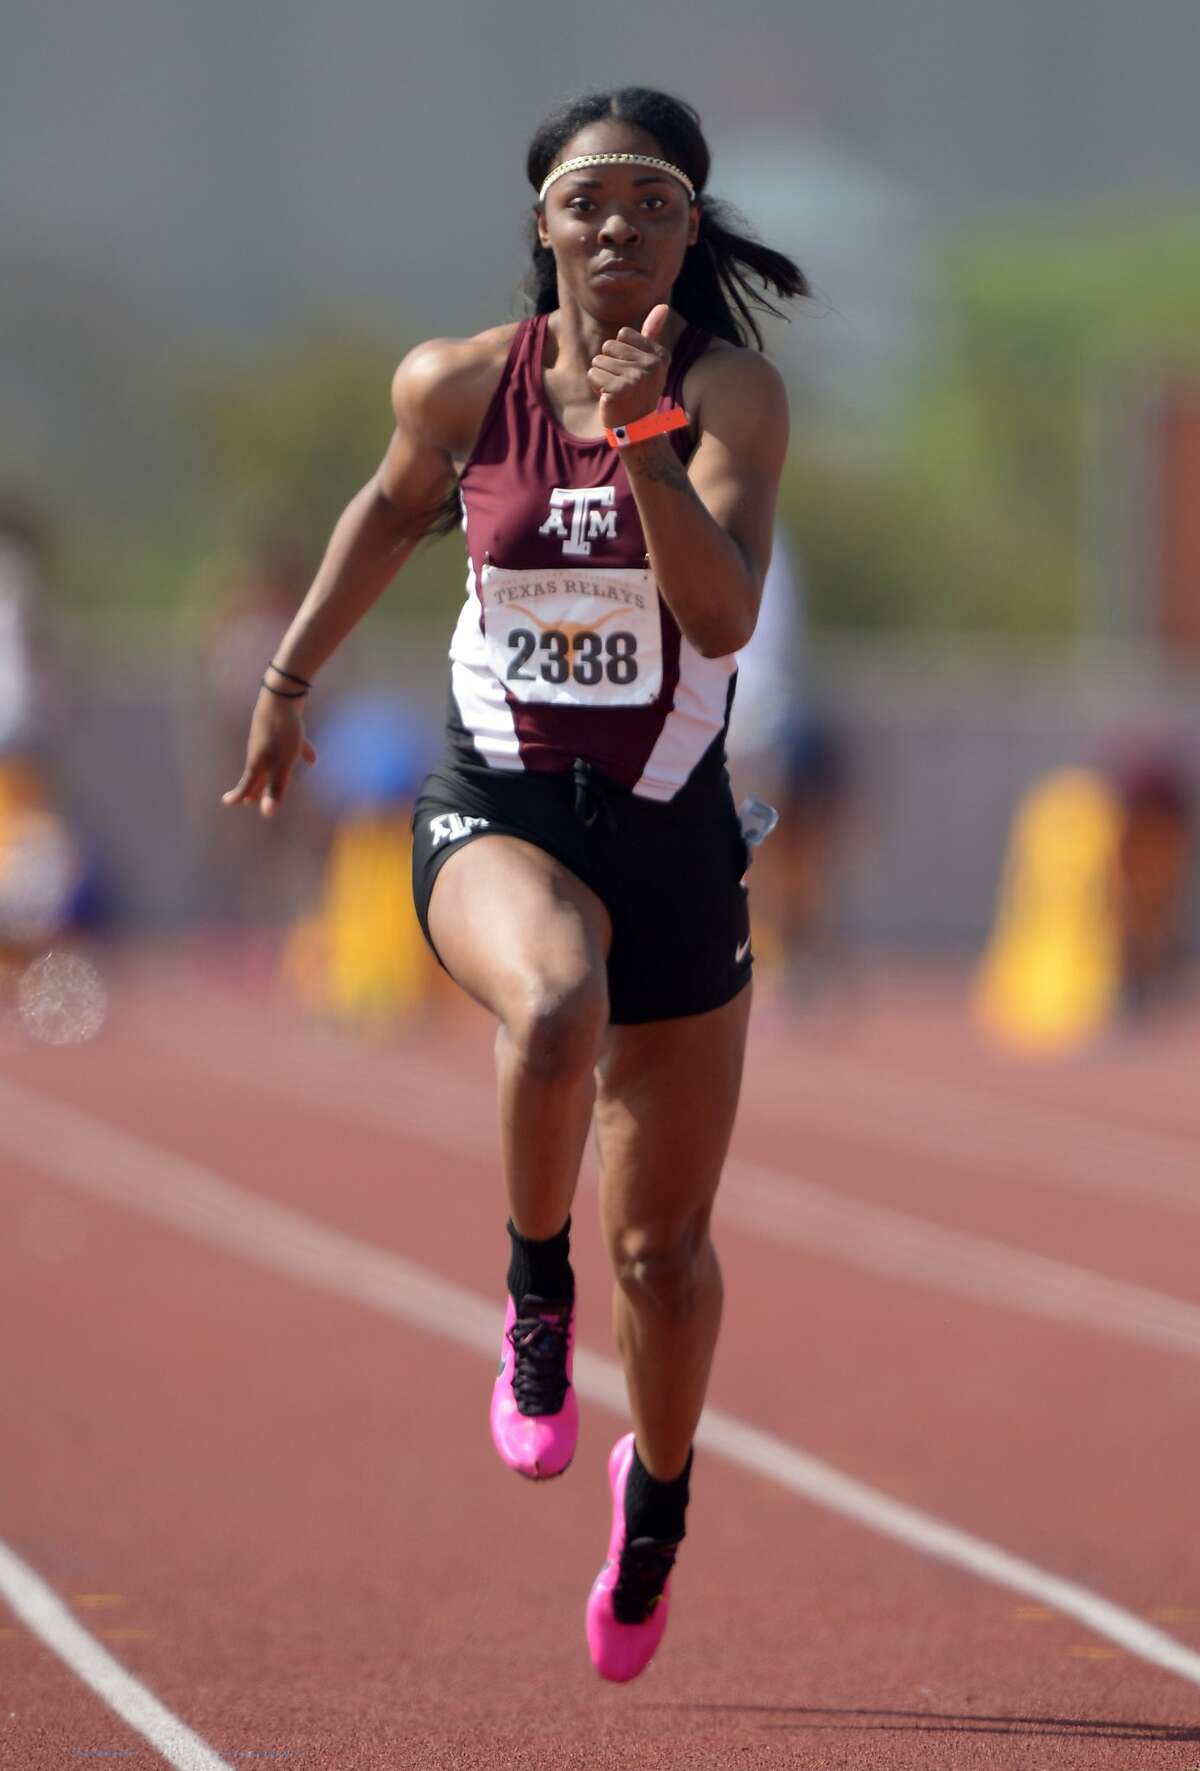 Mar 28, 2014; Austin, TX, USA; Ashton Purvis of Texas A&M runs 11.51 in a womens 100m heat in the 87th Clyde Littlefield Texas Relays at Mike A. Myers Stadium. Mandatory Credit: Kirby Lee-USA TODAY Sports